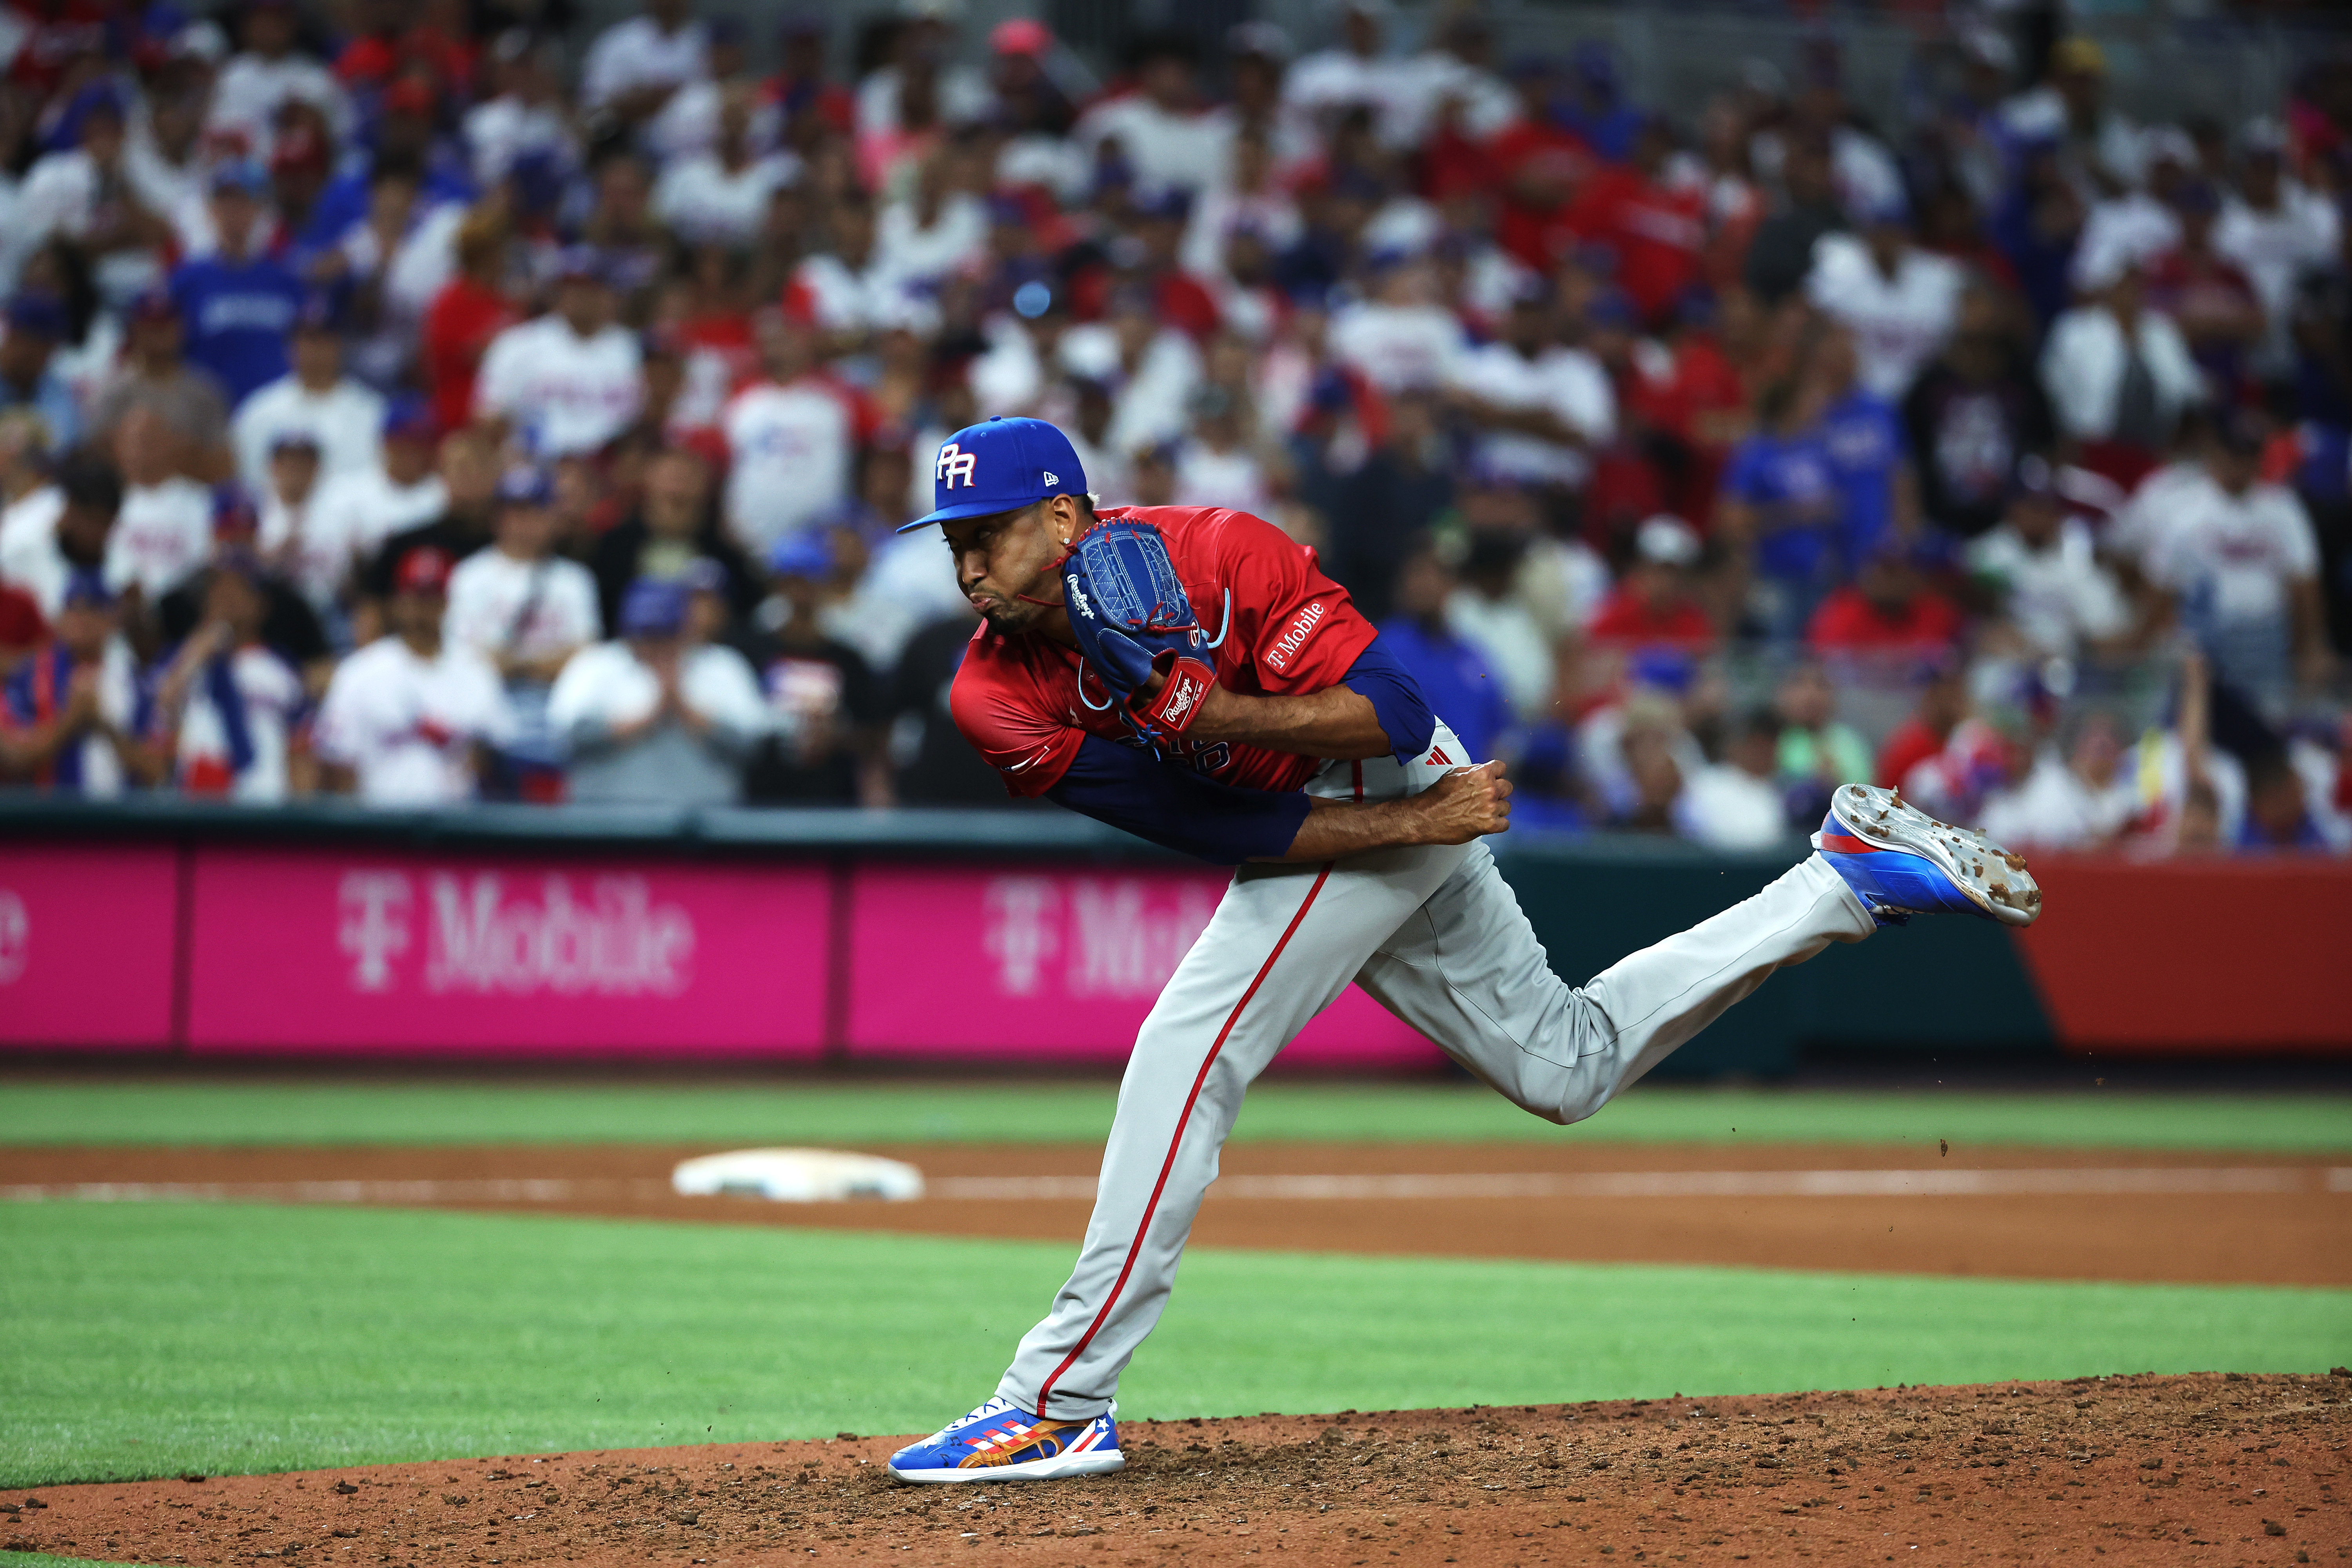 Edwin Diaz of Puerto Rico pitches in the game against the Dominican Republic at the World Baseball Classic at LoanDepot Park in Miami, Florida, March 15, 2023. /CFP